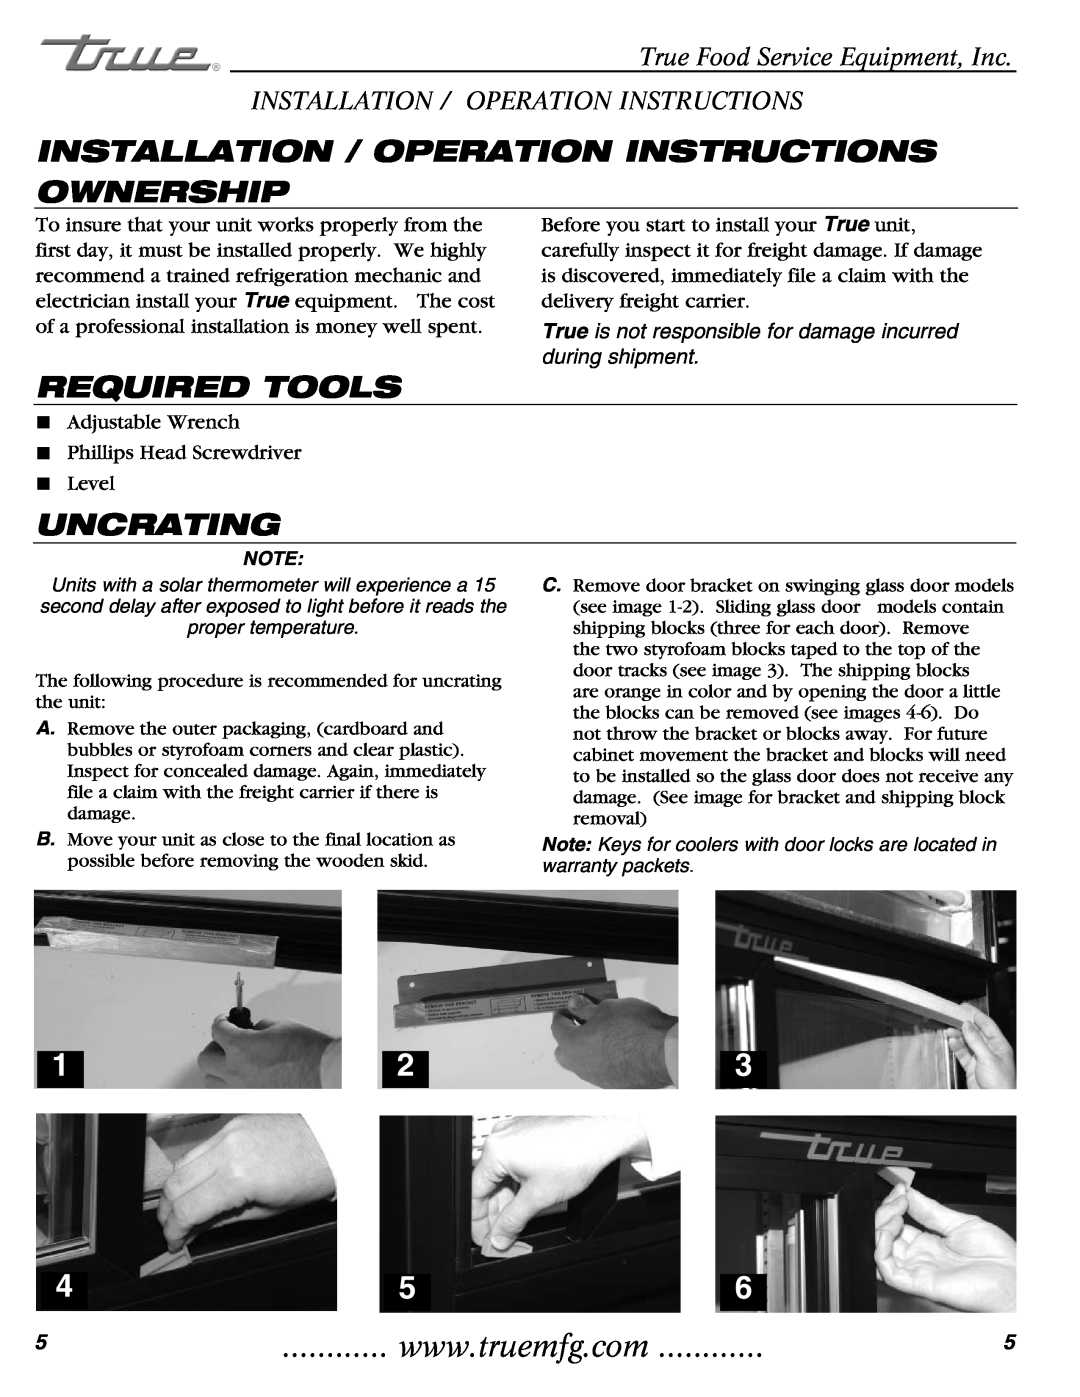 True Manufacturing Company T-35 Installation / Operation Instructions Ownership, Required Tools, Uncrating 